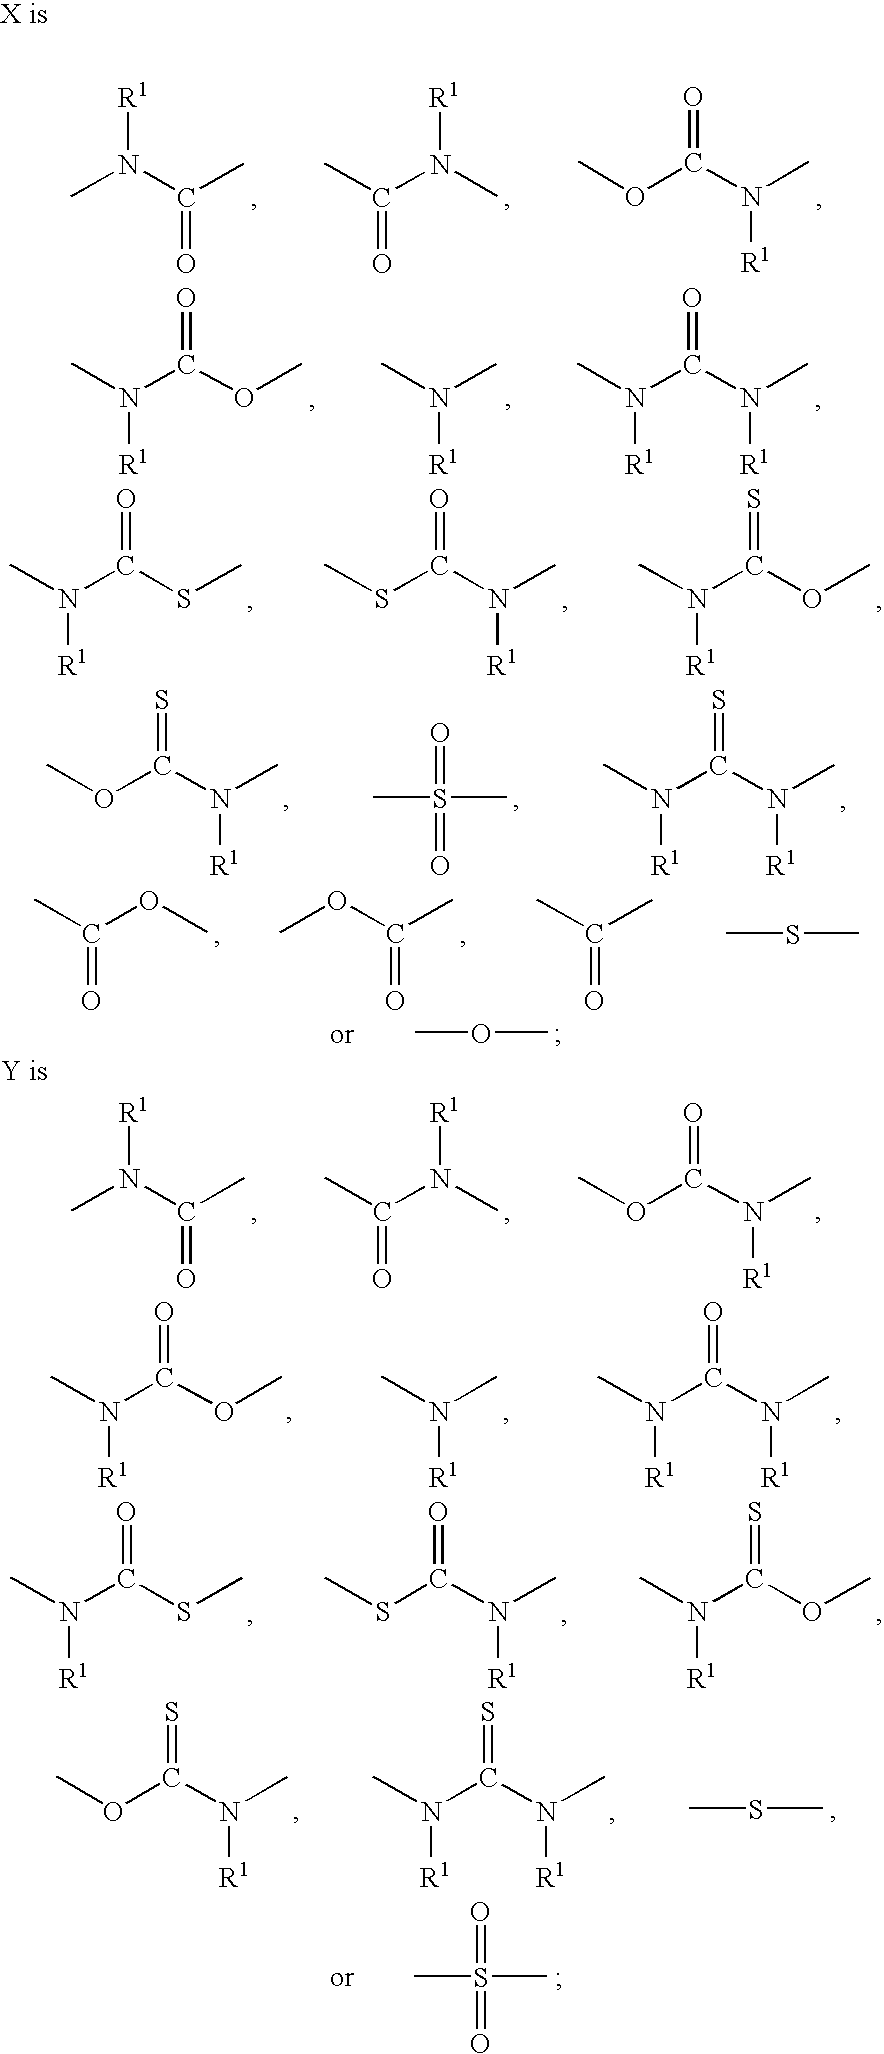 Curable electron donor compounds